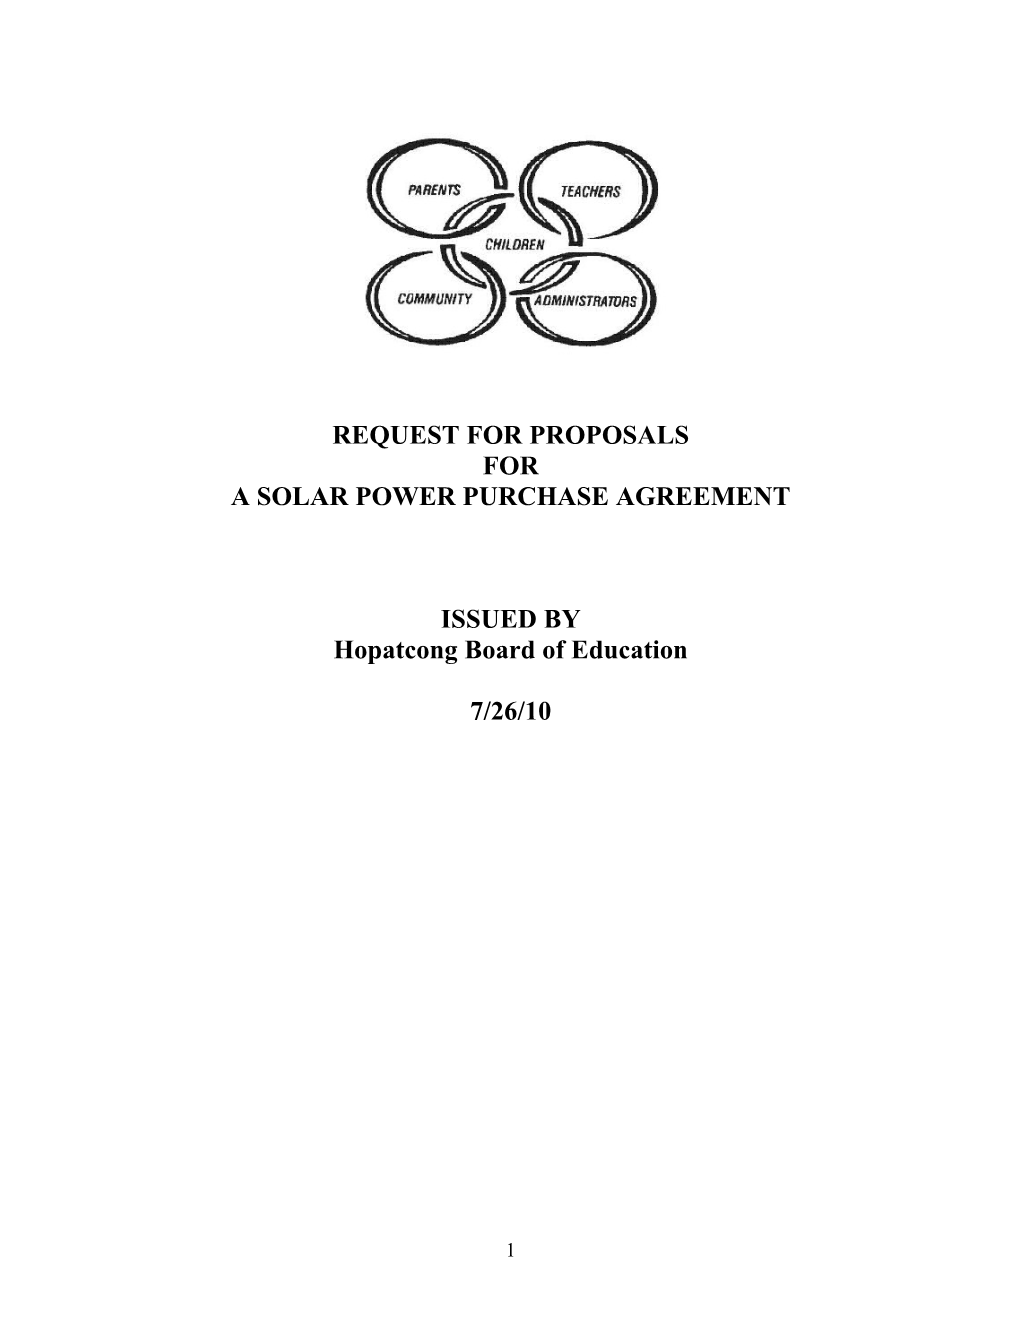 A Solar Power Purchase Agreement